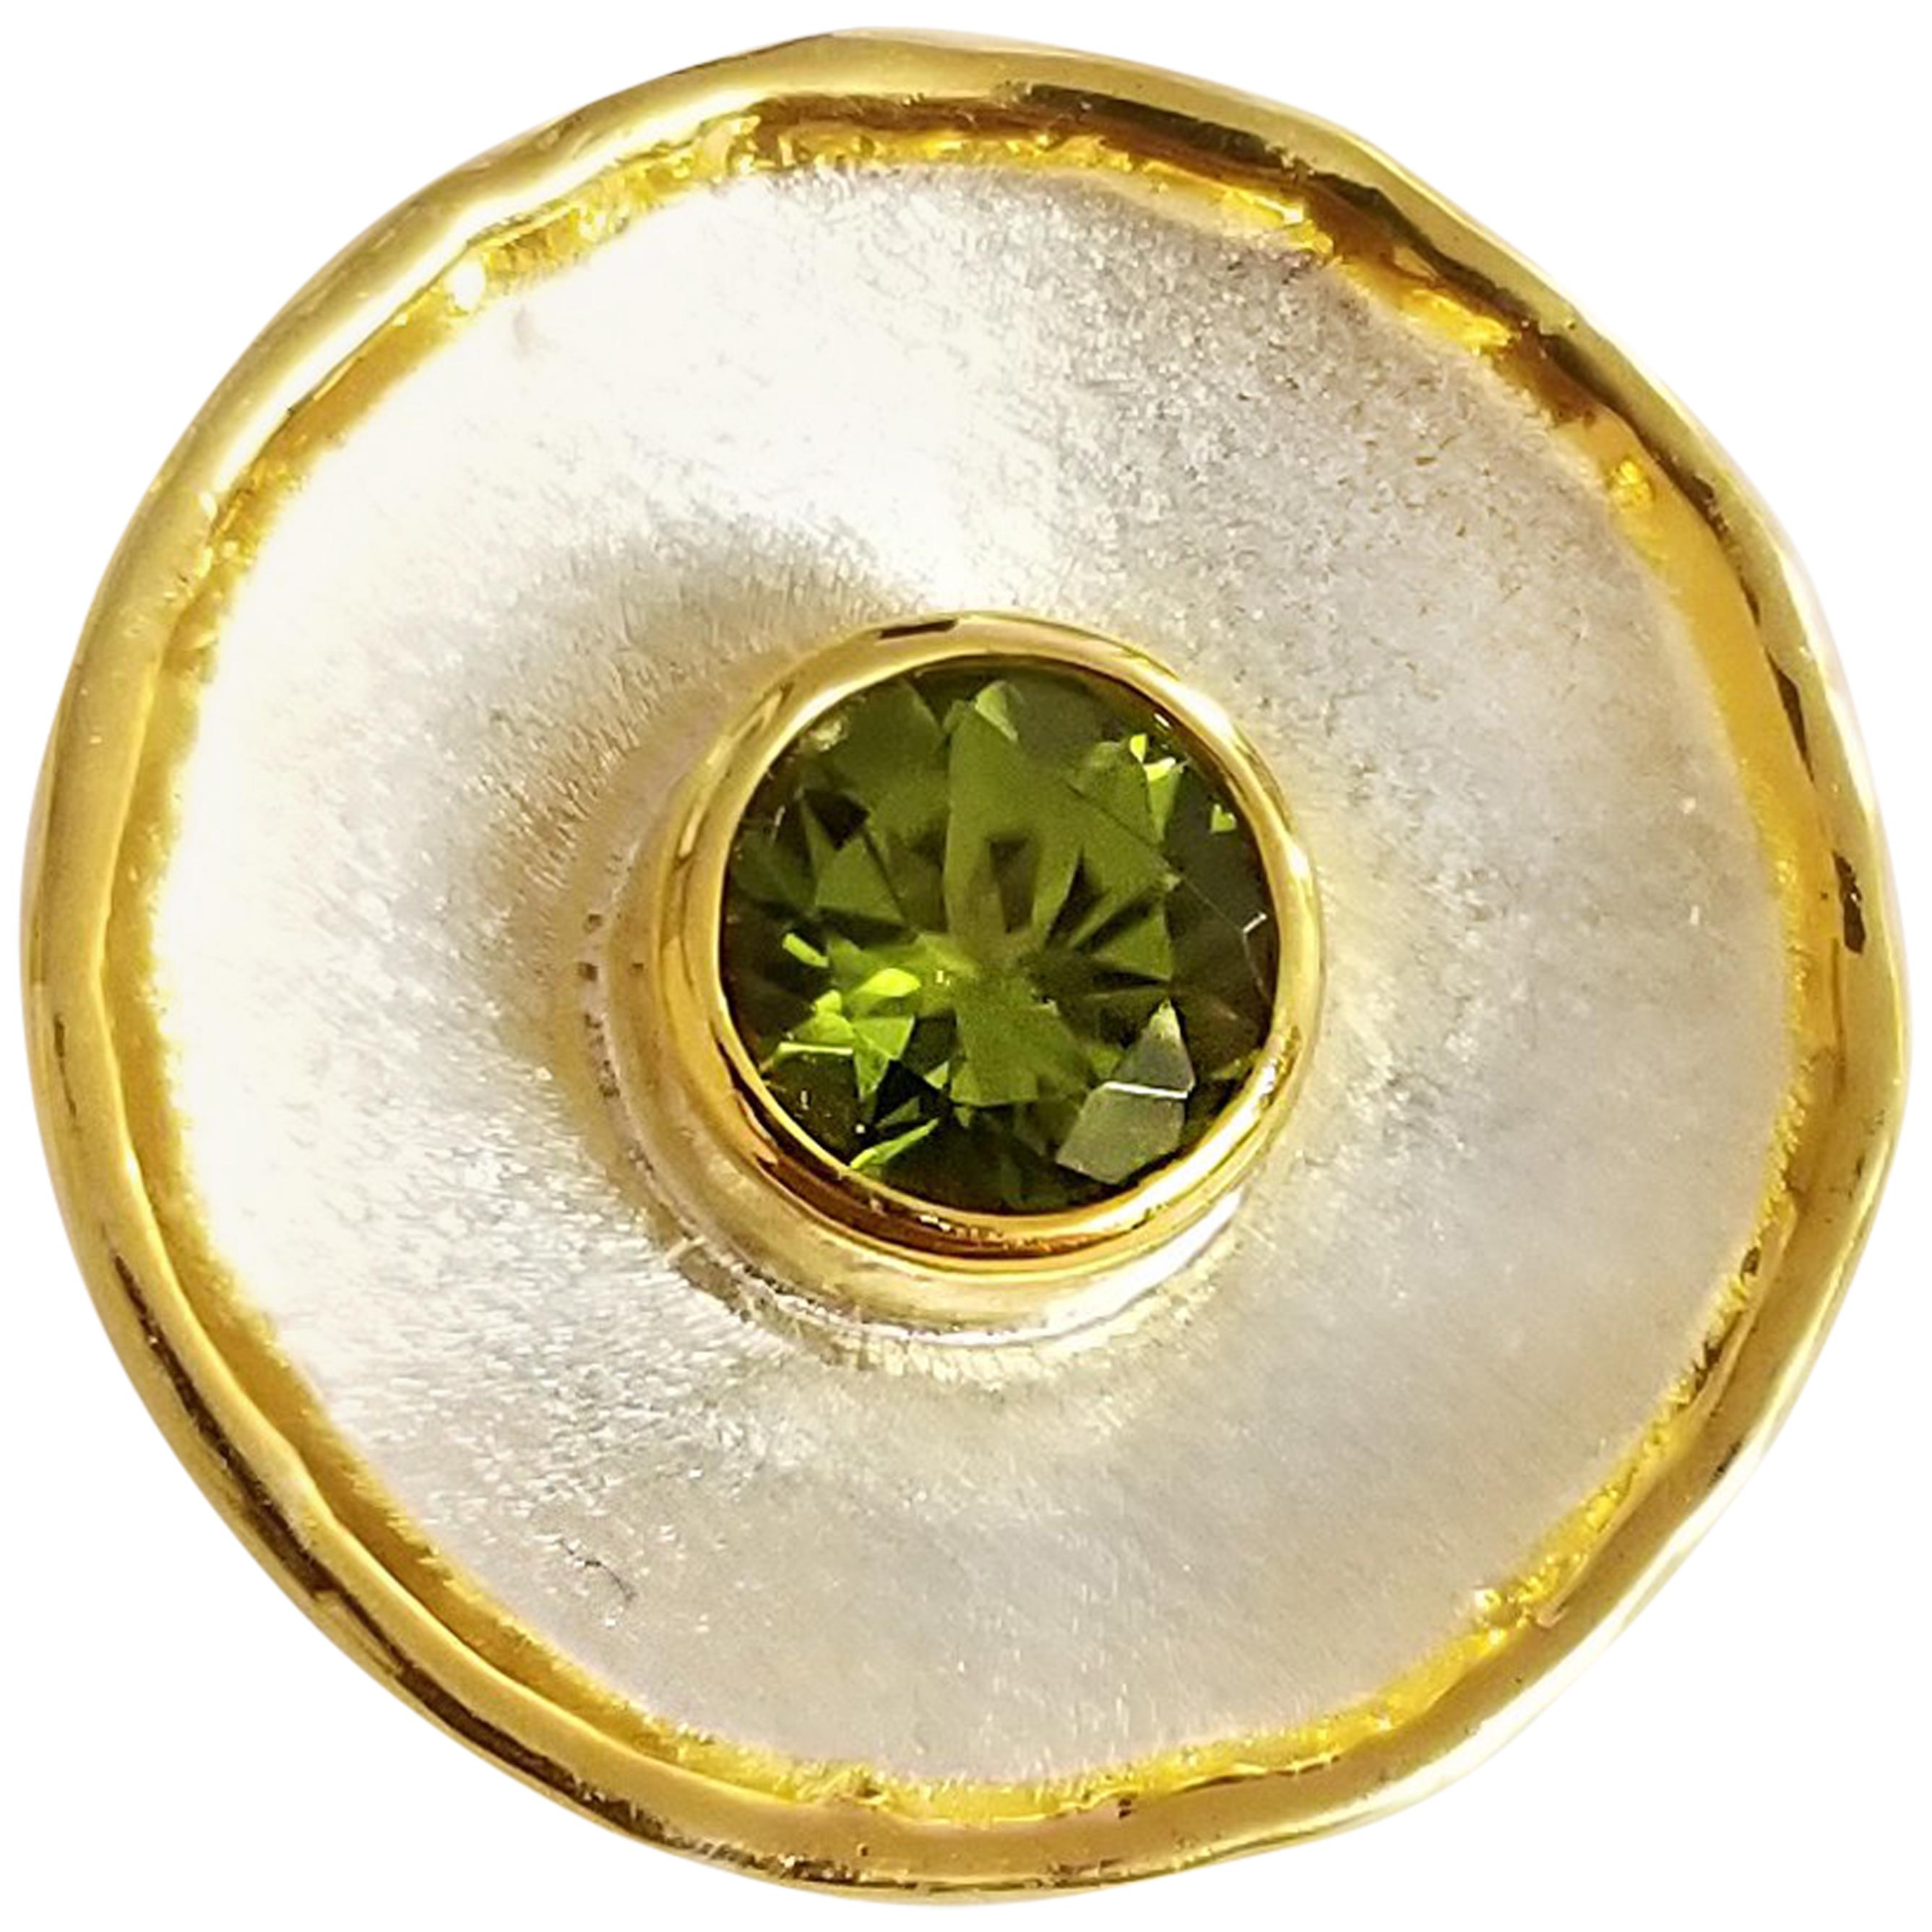 Yianni designer round solitaire pendant from Fine Silver 950 purity with a layover of 24 Karat Yellow Gold features a 2.00 Carat Round Cut Peridot complemented by unique techniques of craftsmanship - brushed texture and nature-inspired liquid edges.